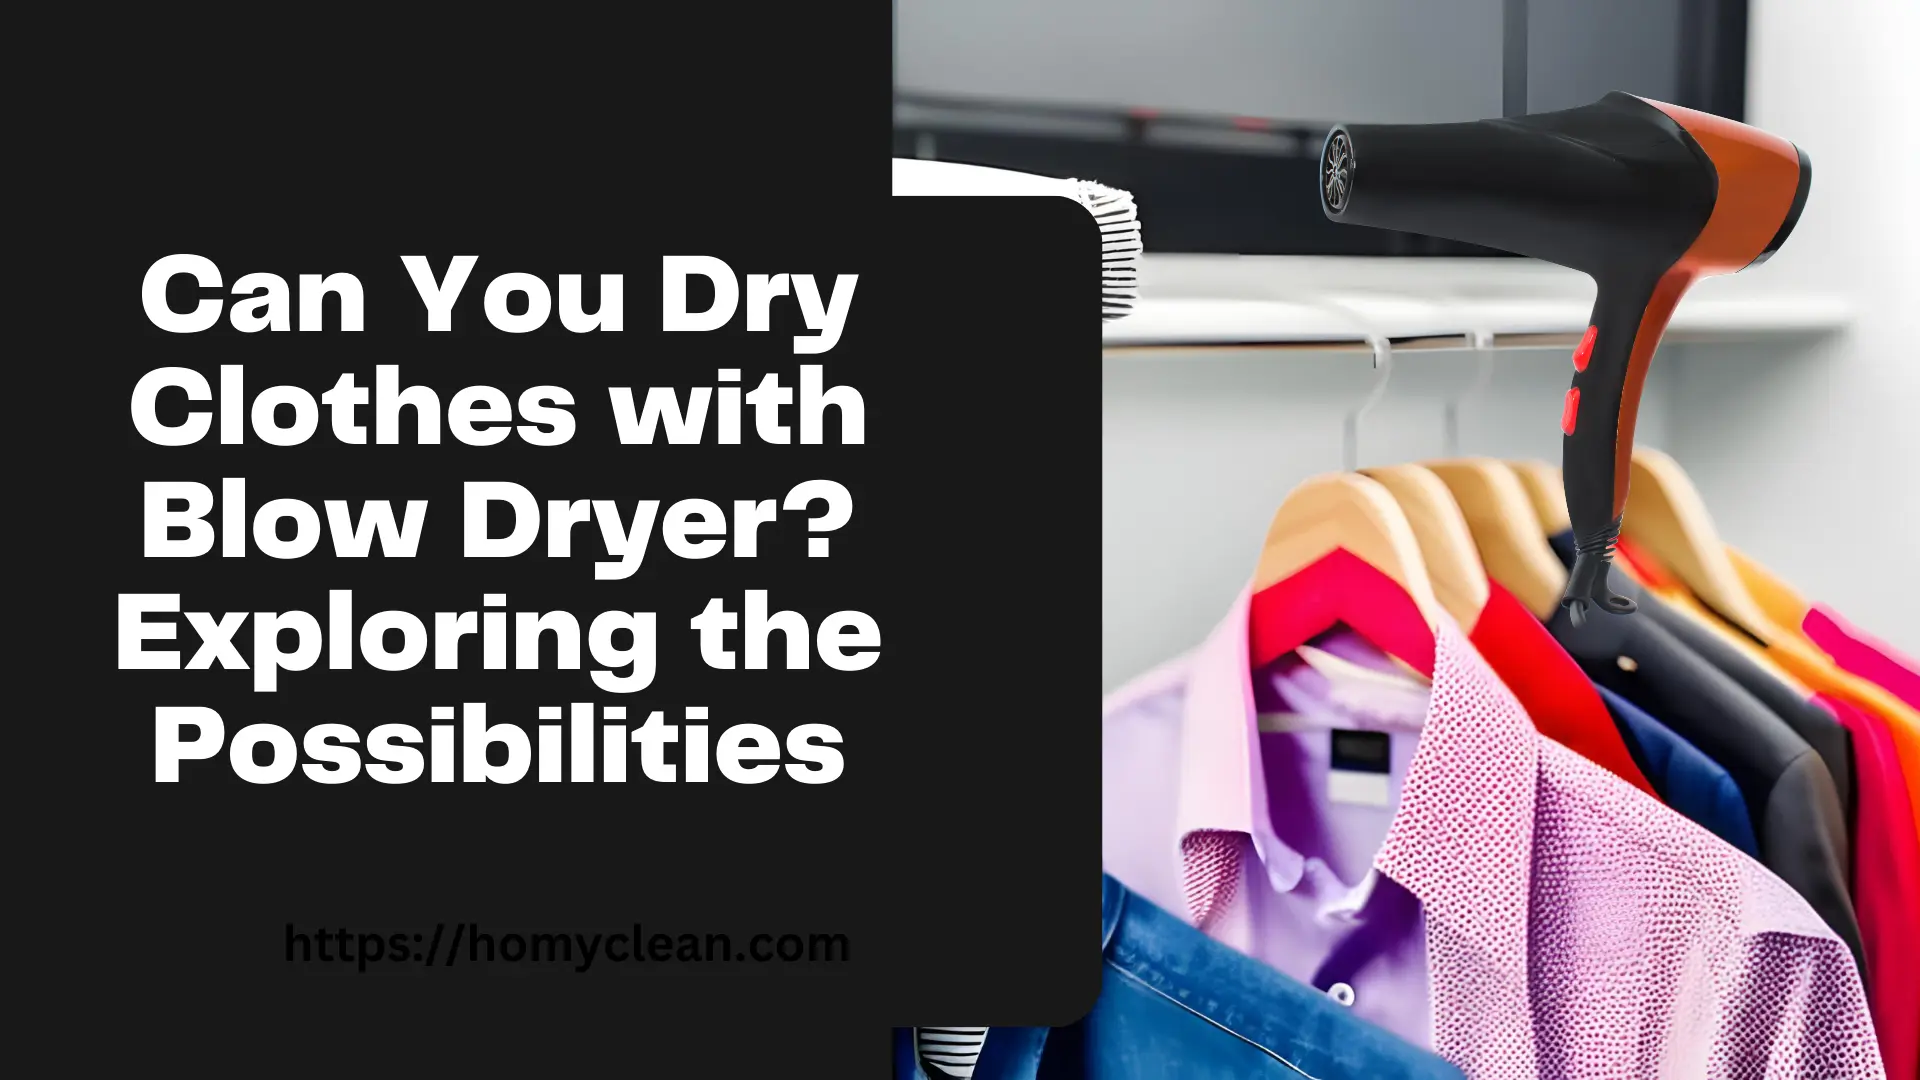 Can You Dry Clothes with Blow Dryer? Exploring the Possibilities